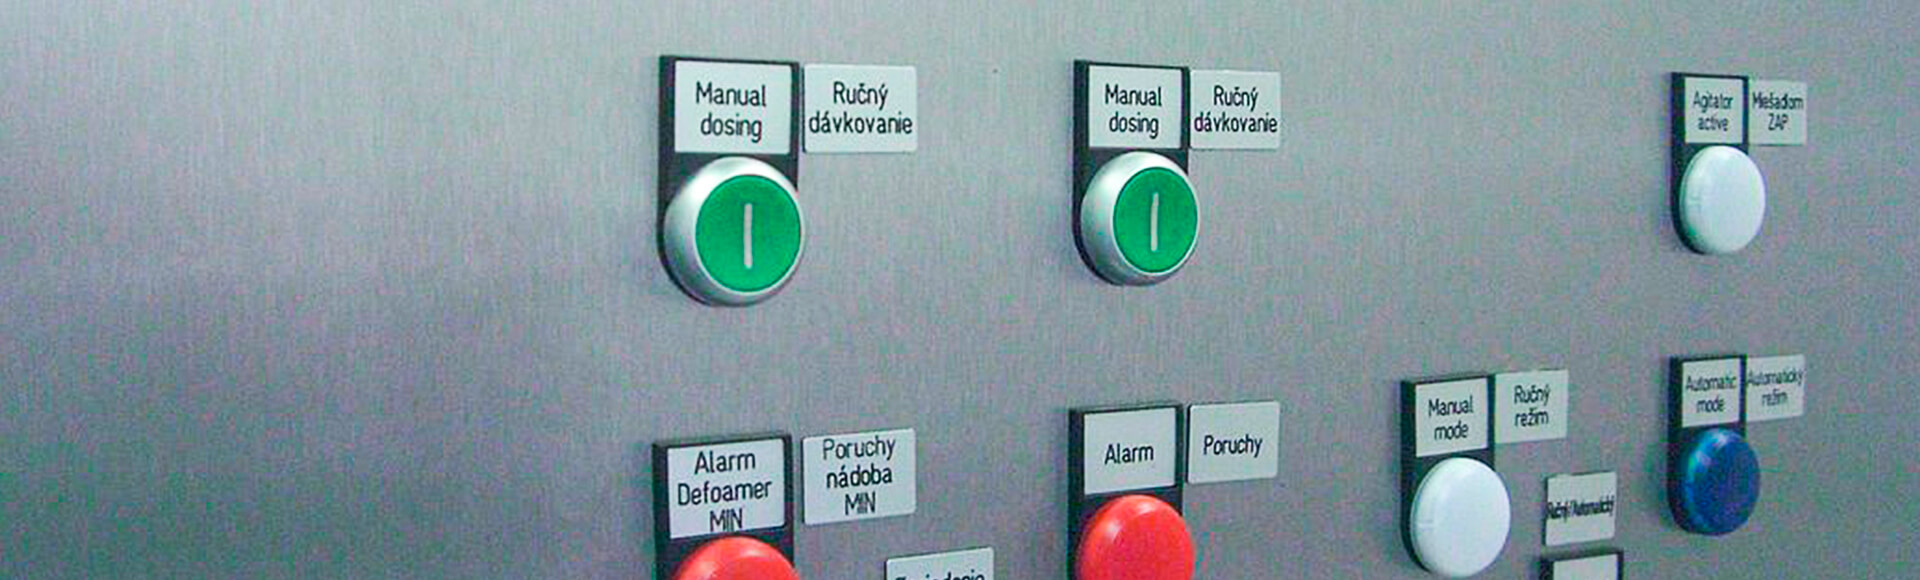 Detailed view of a control cabinet of an operating plant in the field of plant engineering of robotic chemistry